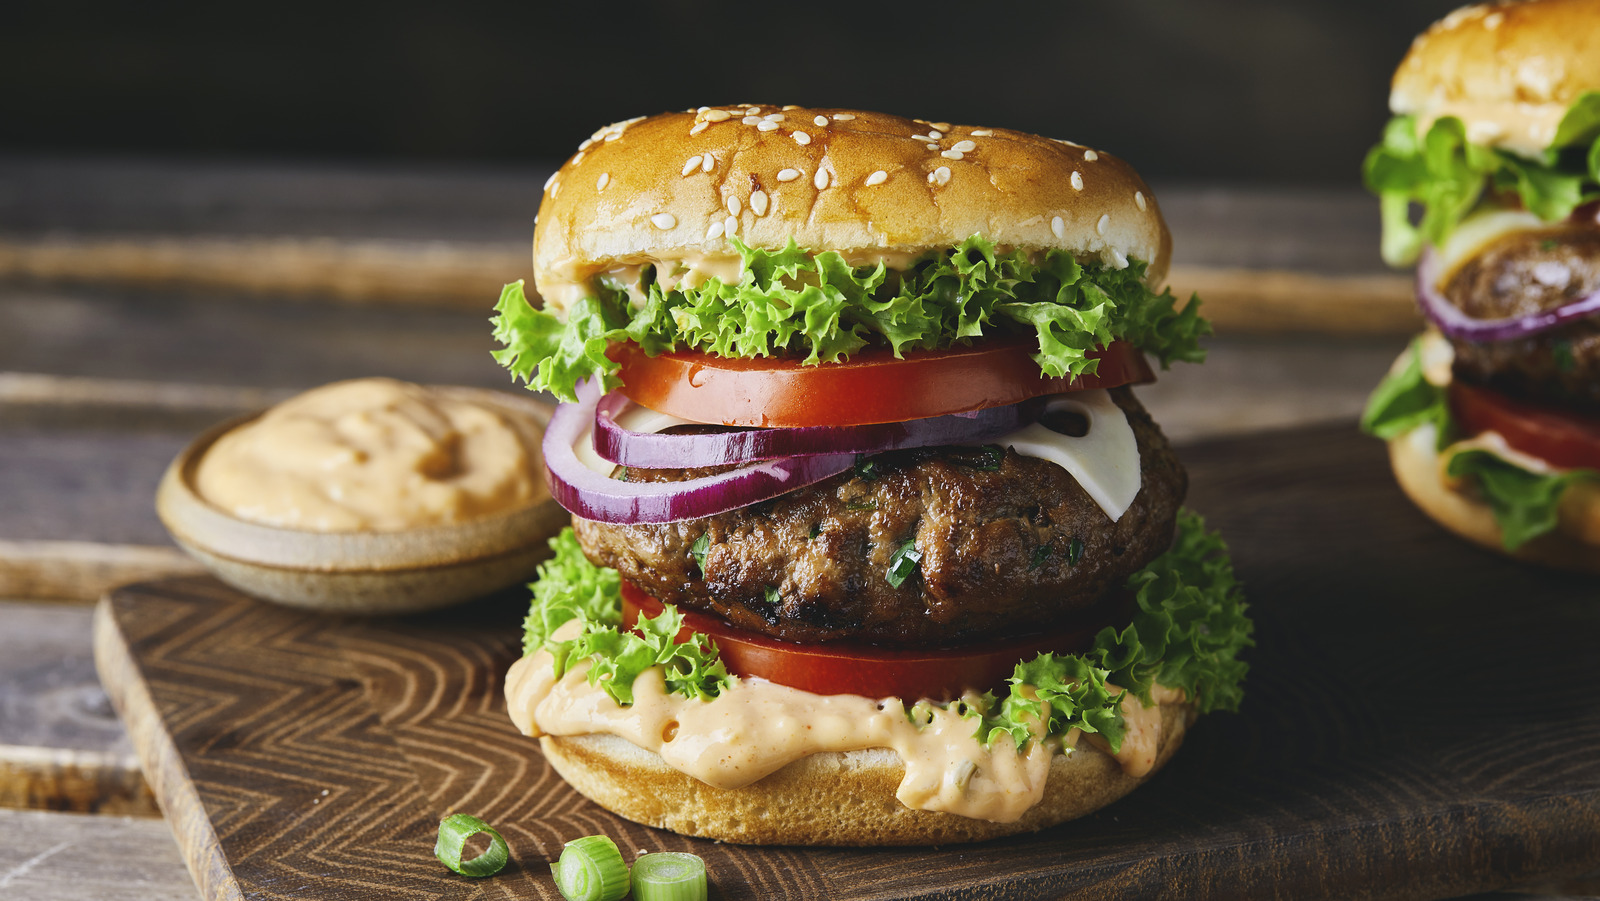 Make a leaner (but still delicious) burger by going half vegetarian